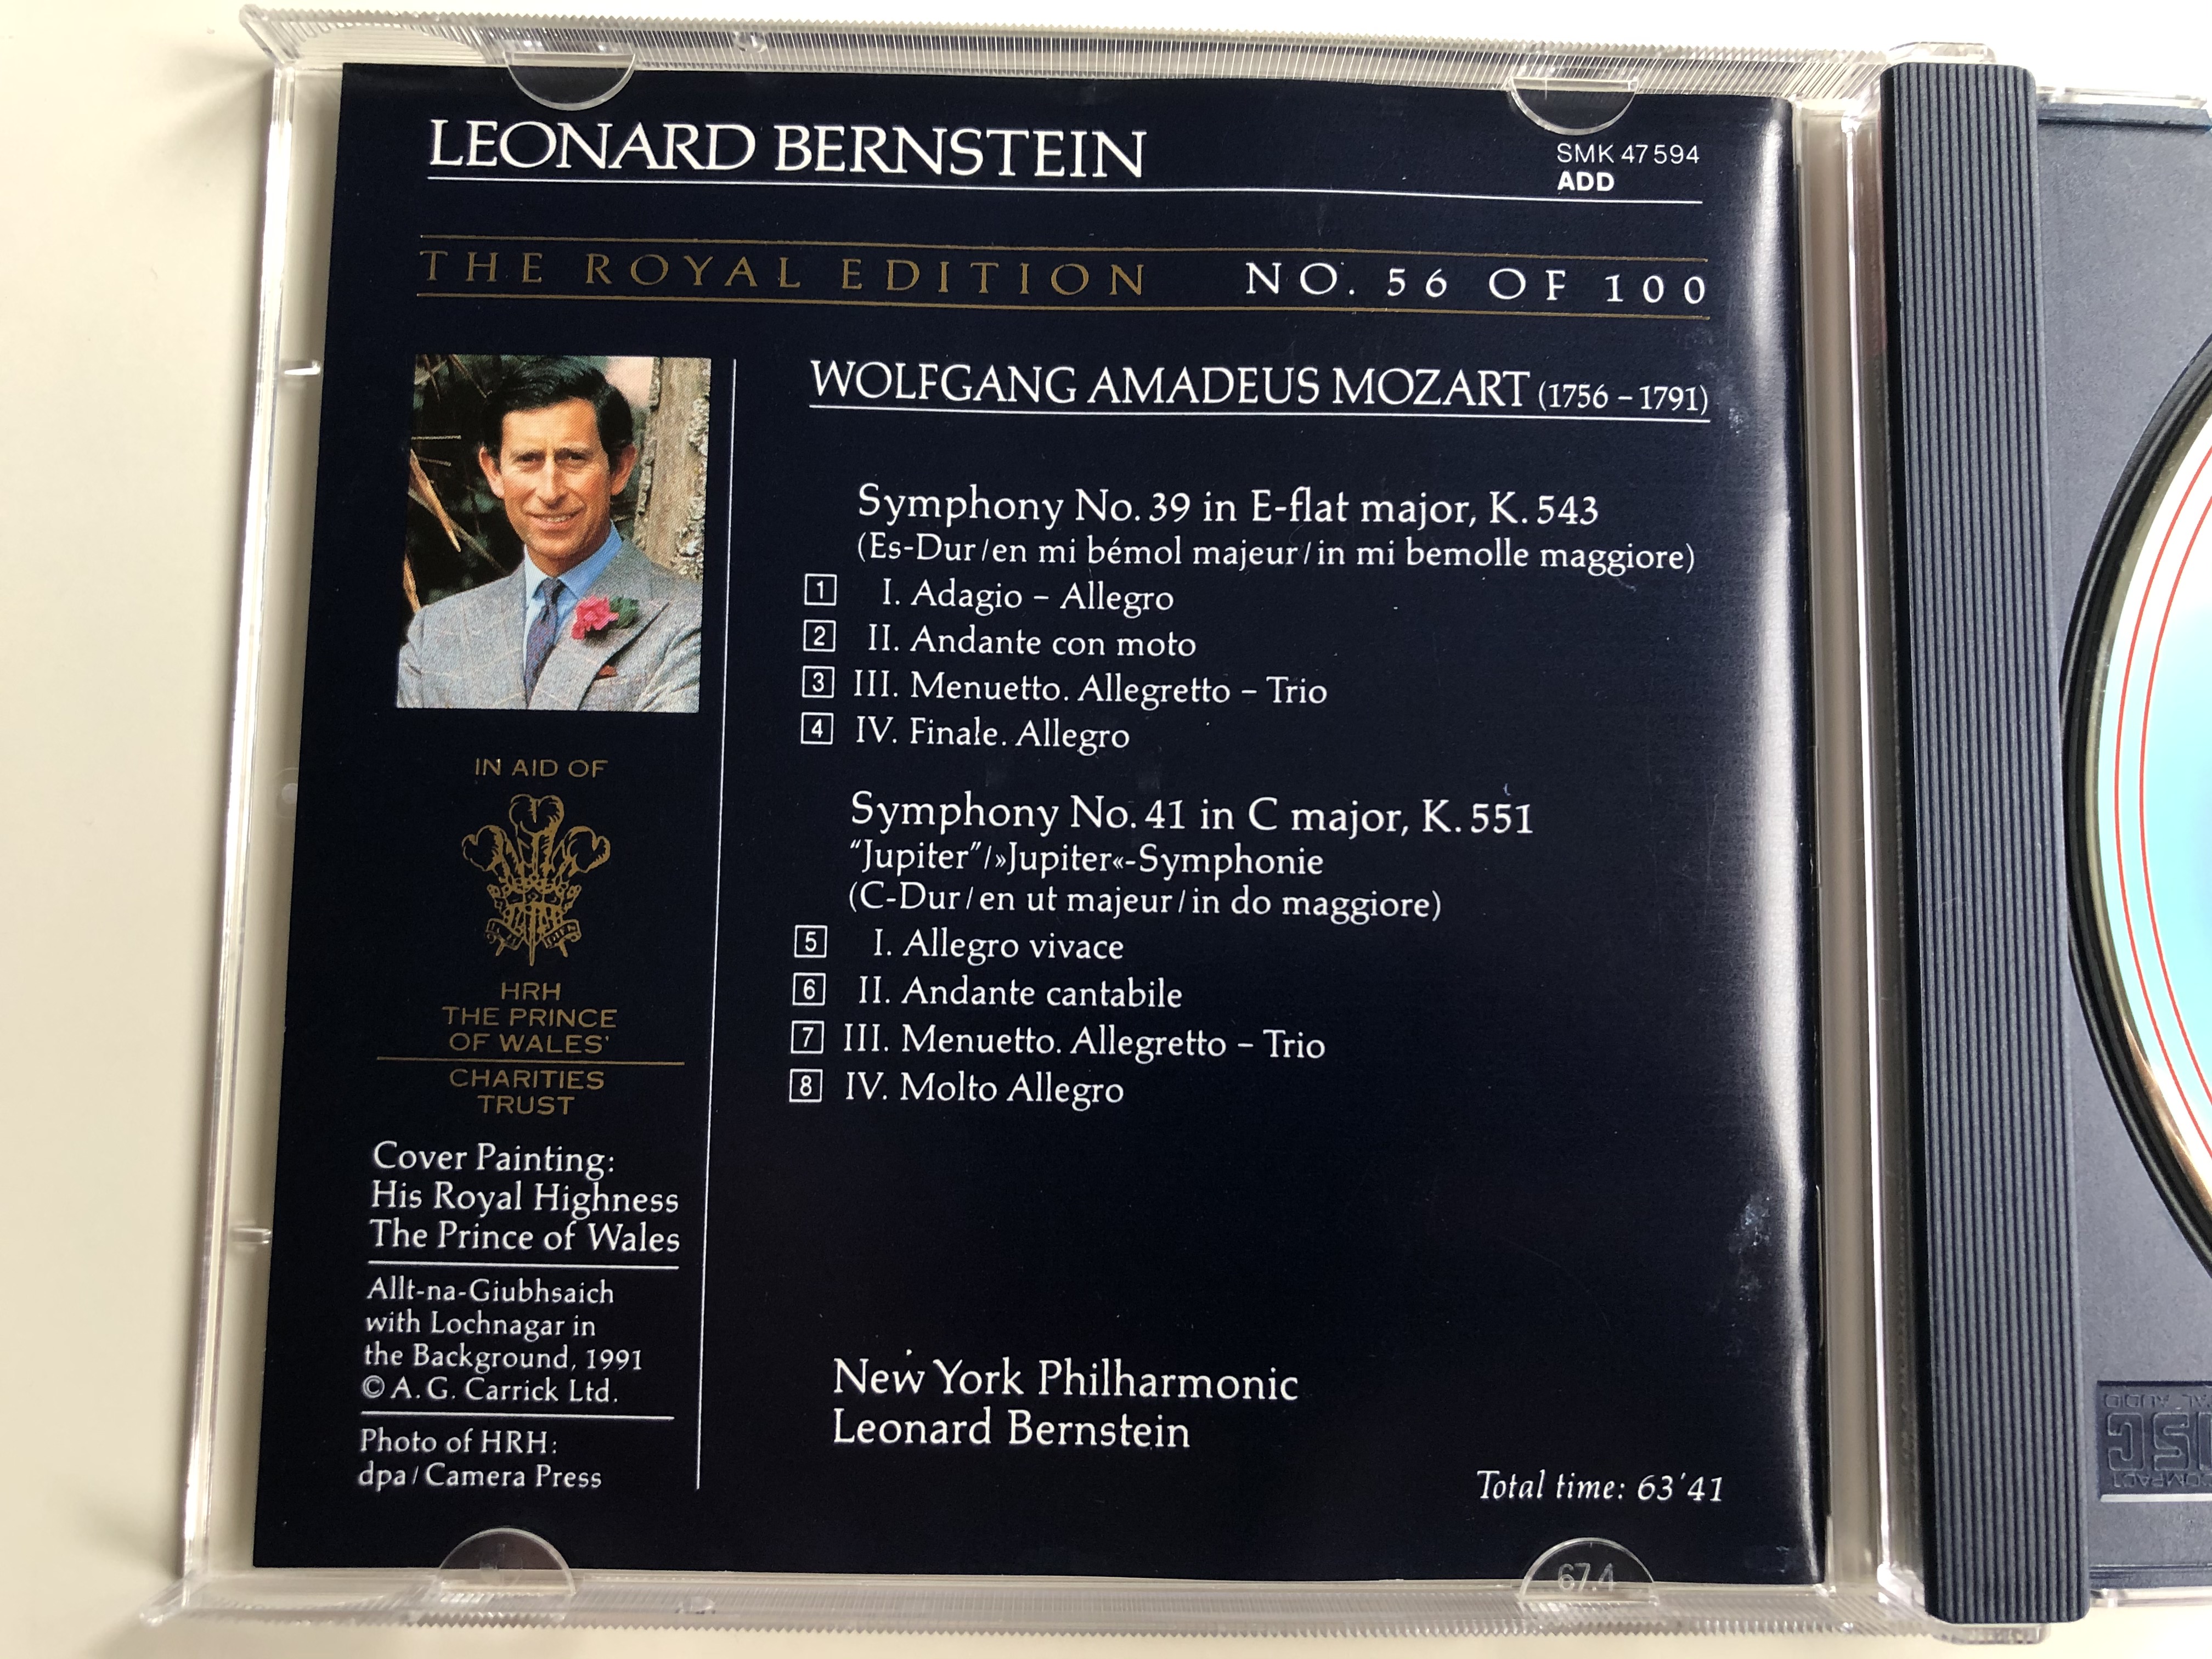 leonard-bernstein-mozart-symphony-no.39-symphony-no.41-jupiter-new-york-philharmonic-the-royal-edition-painting-by-h.r.h.-the-prince-of-wales-no.-56-of-100-hrh-sony-classical-audio-cd-19-5-.jpg